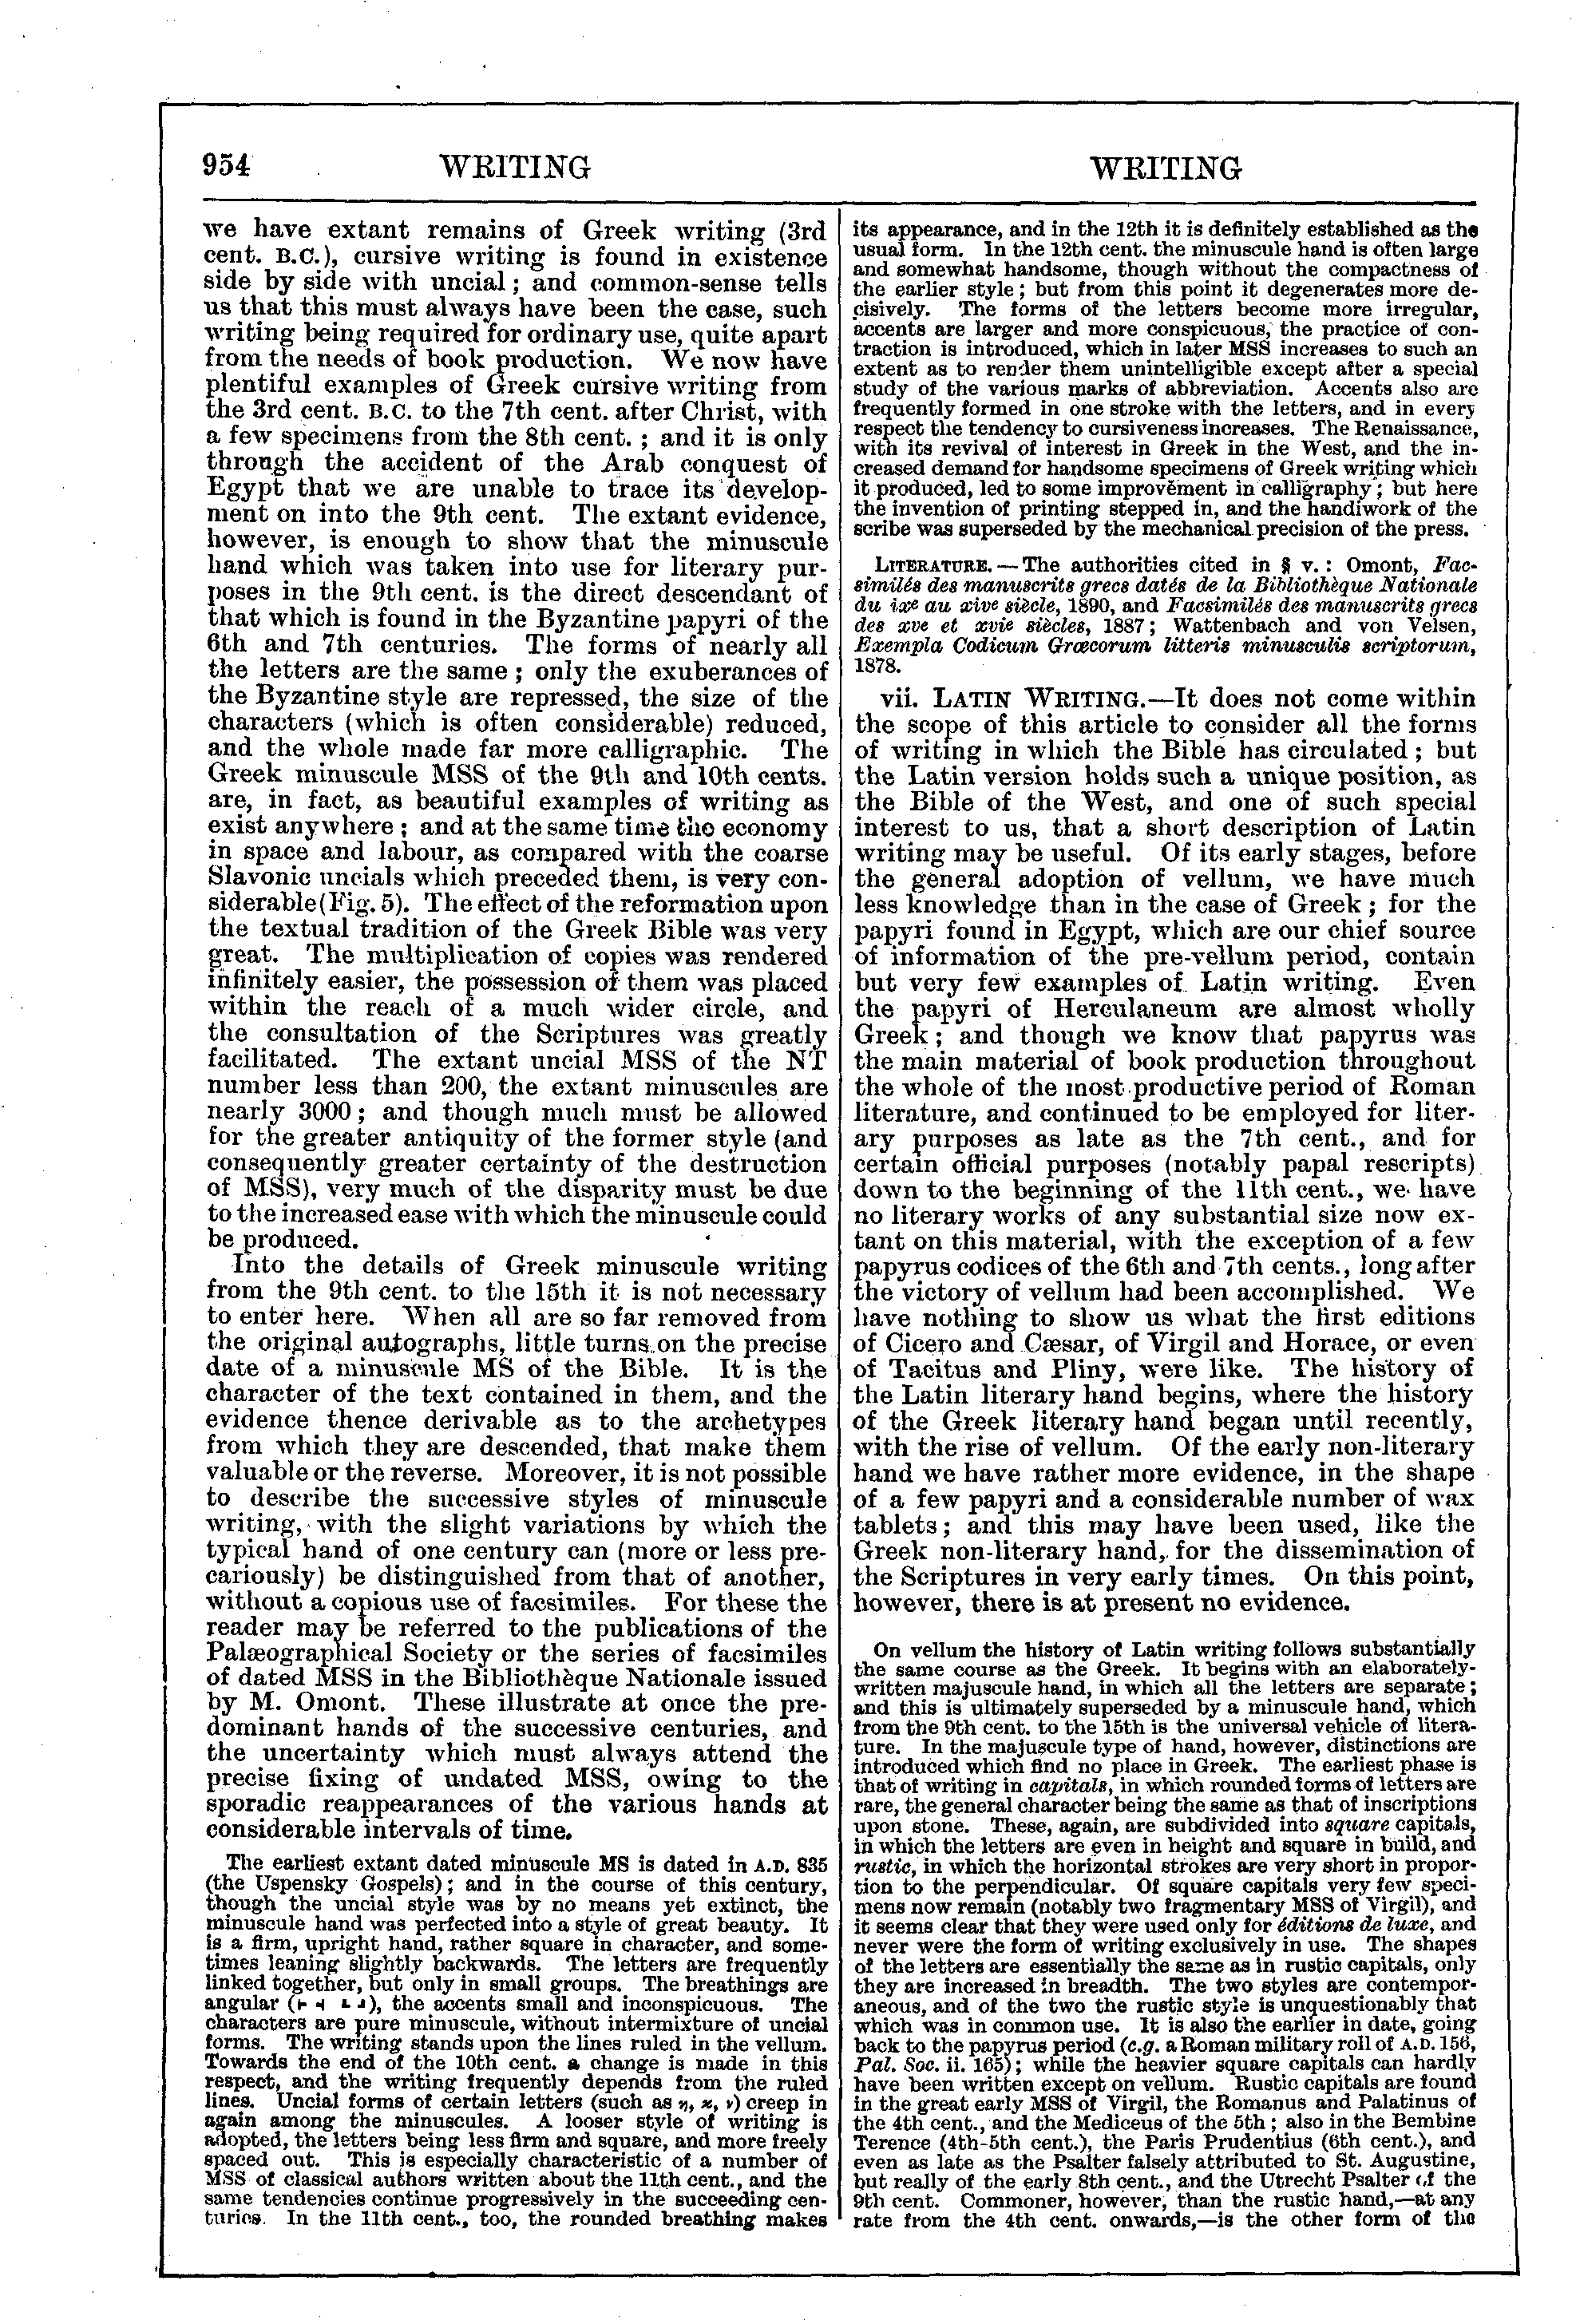 Image of page 954